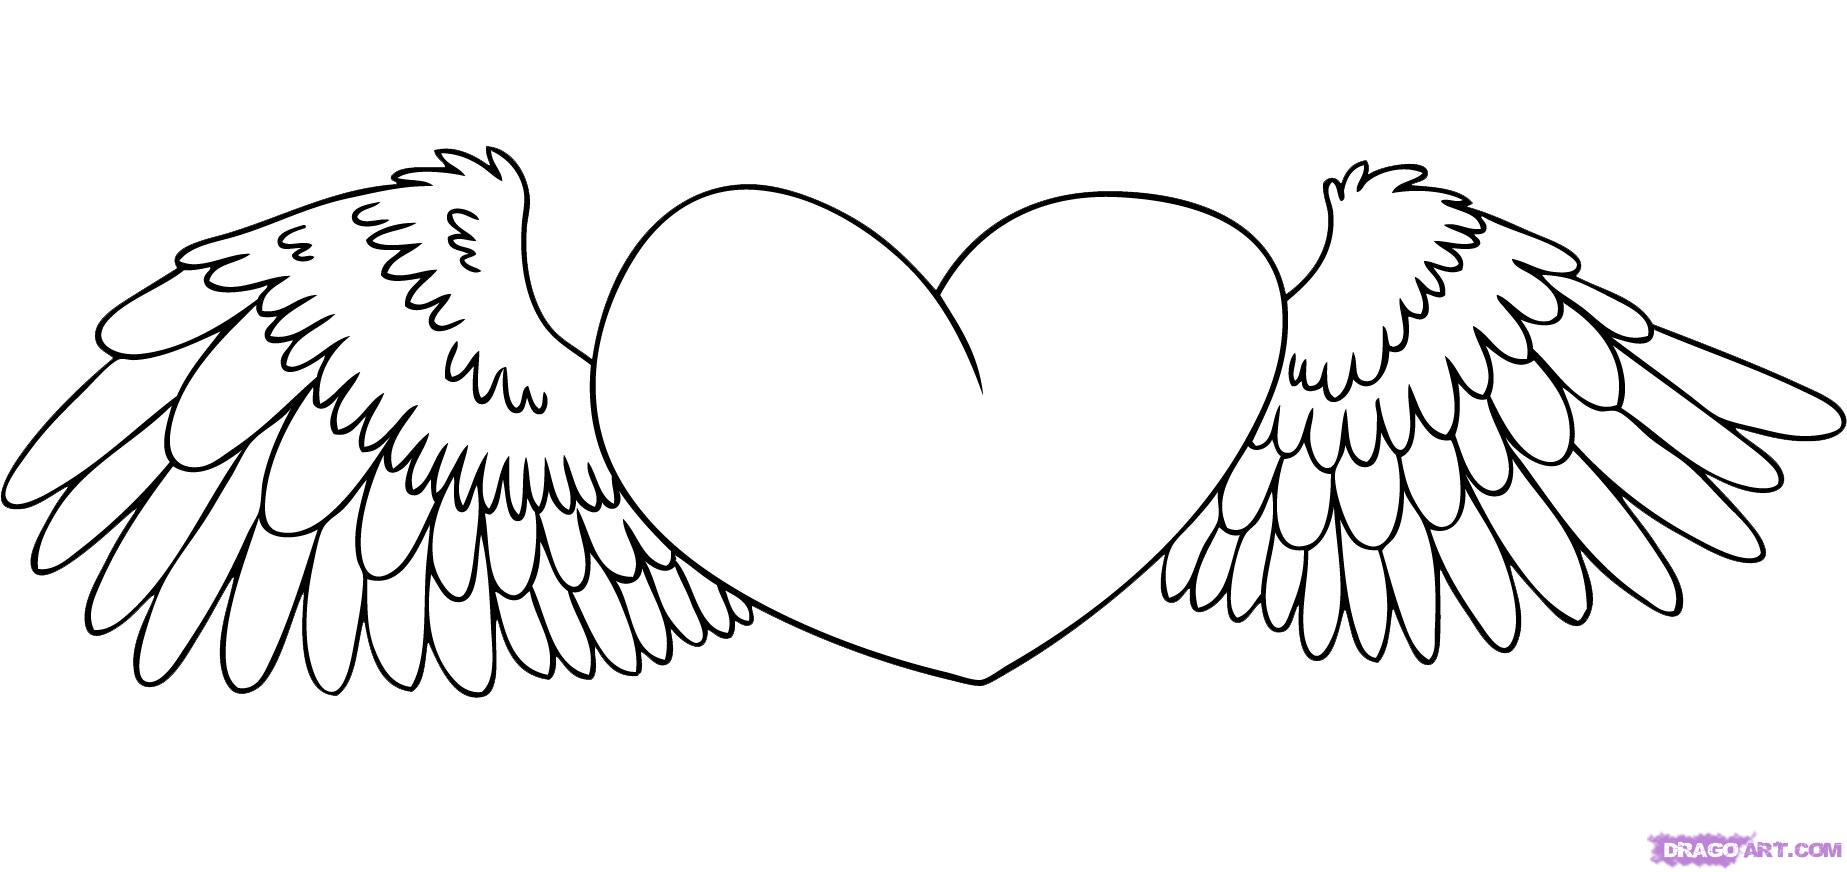 Free Hearts With Wings And Roses Coloring Pages Download Free Clip Art Free Clip Art On Clipart Library Kids love to color hearts and roses, but these are elegant enough for adults to love as well. clipart library